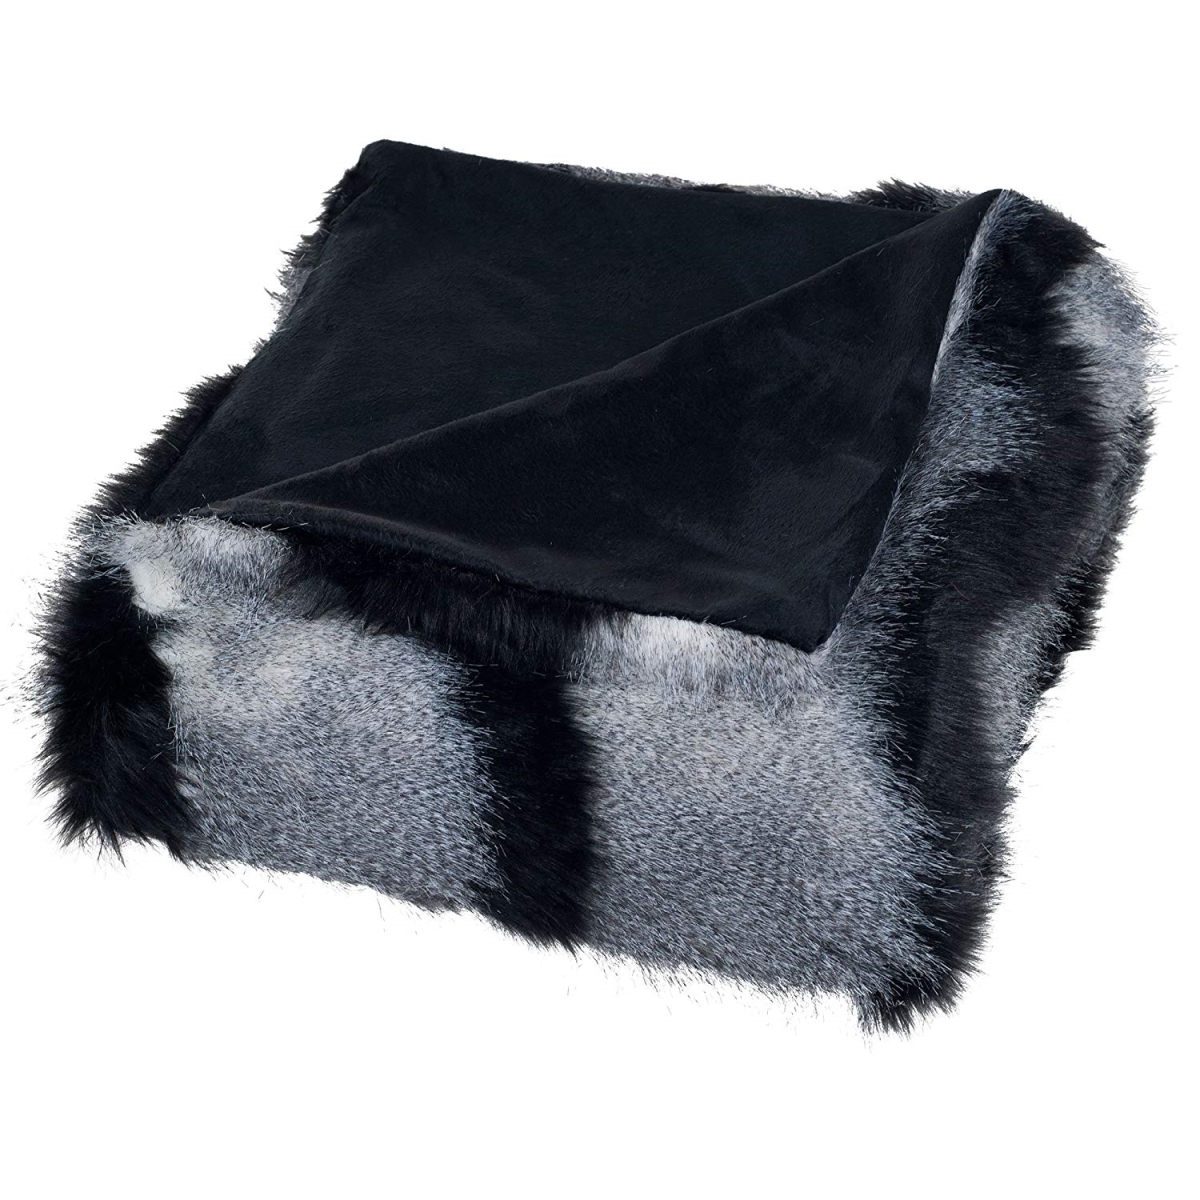 61a-26621 Luxury Long Haired Striped Faux Fur Throw Blanket, Black